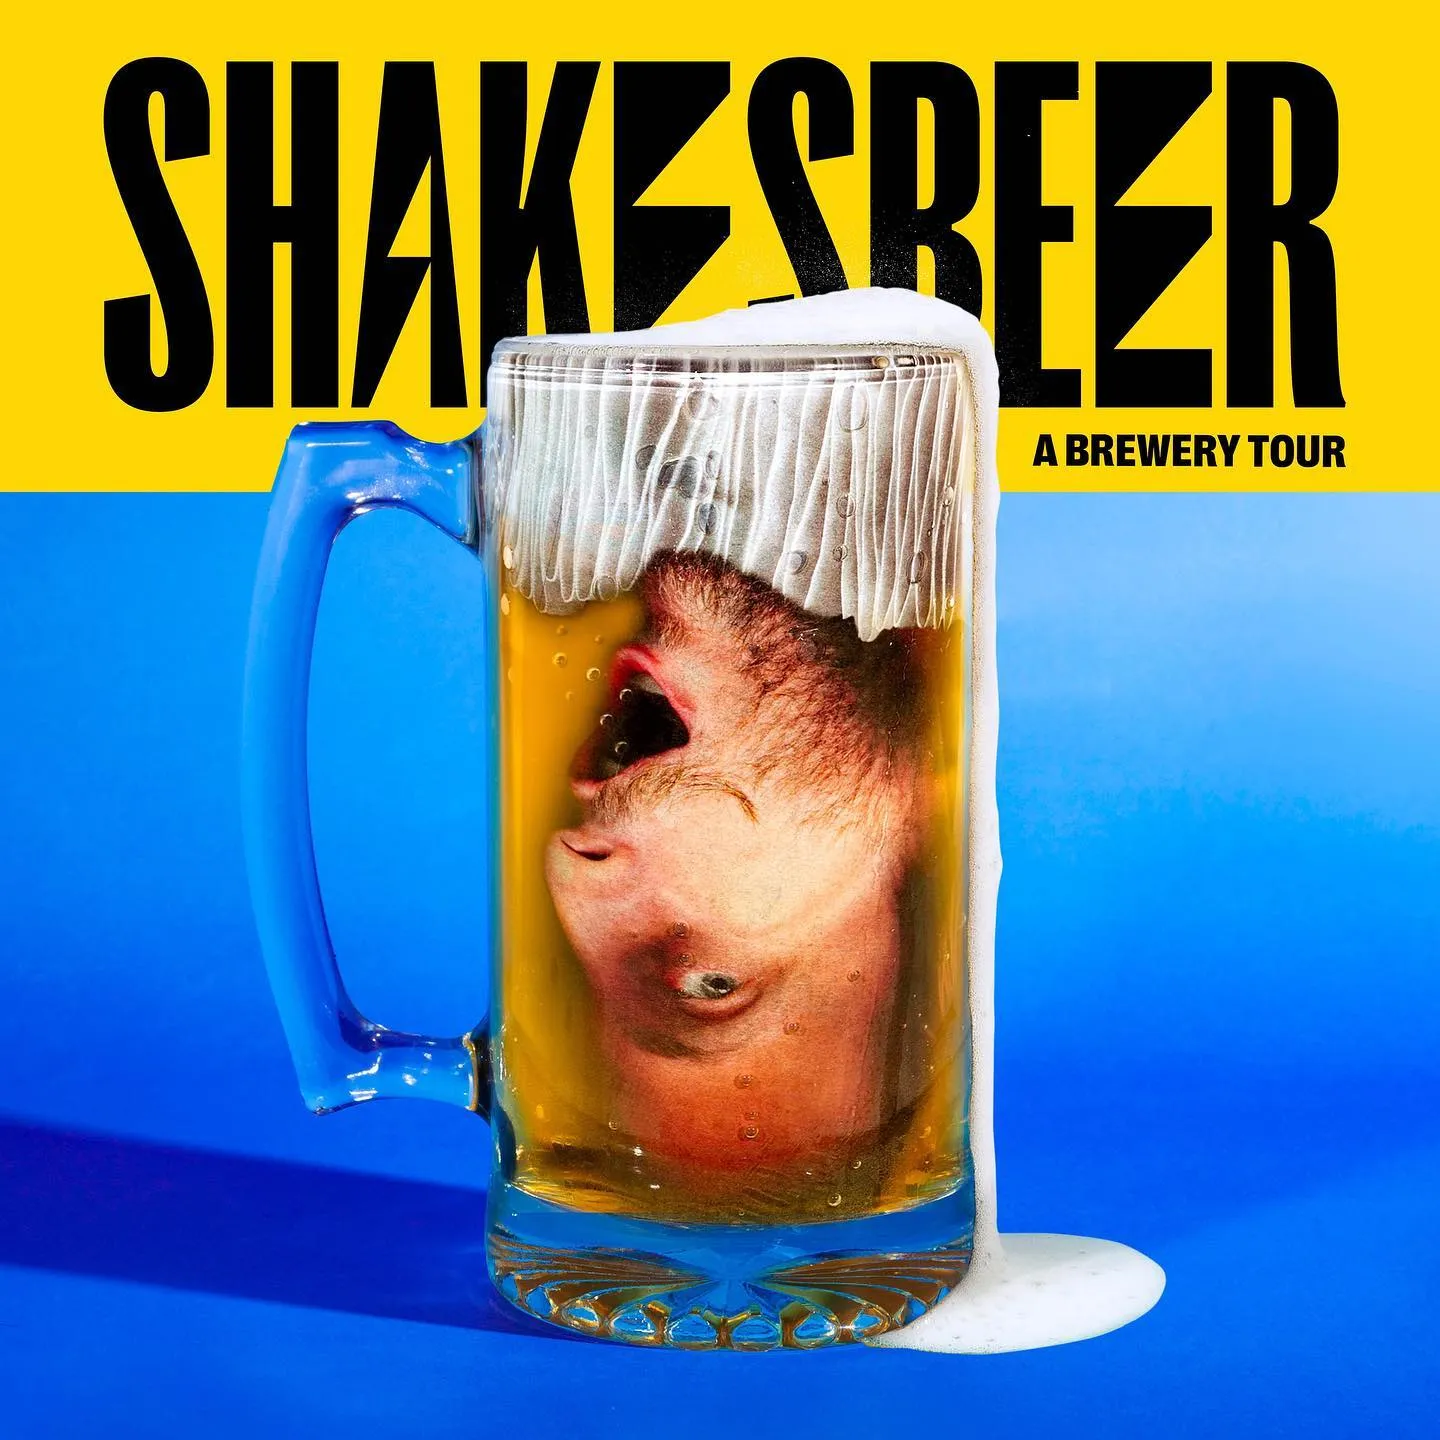 ShakesBeer: A Brewery Tour